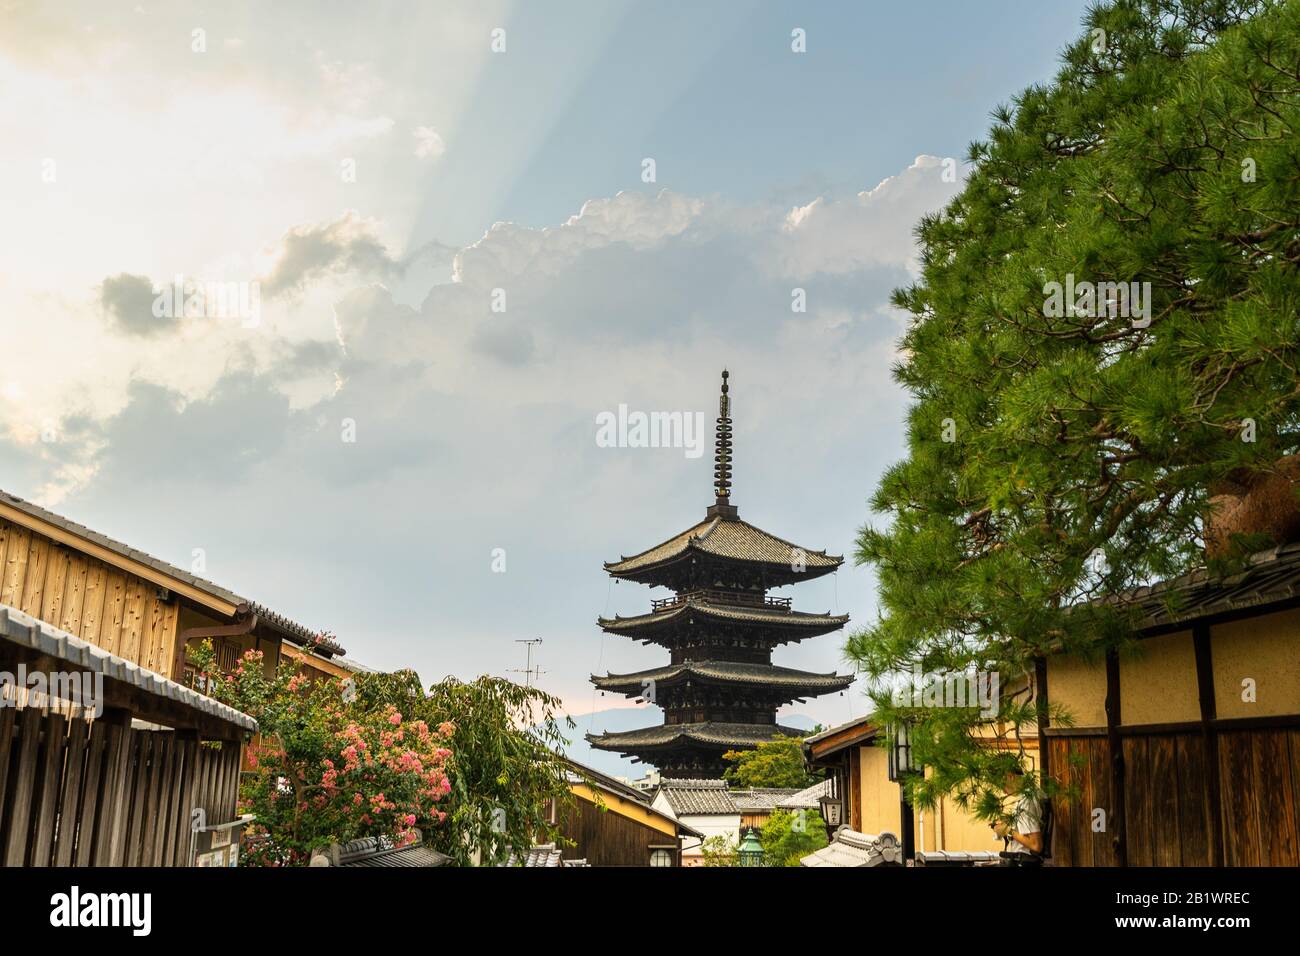 View of Yasaka pagoda, one of the most famous buildings of Kyoto skyline, Japan Stock Photo